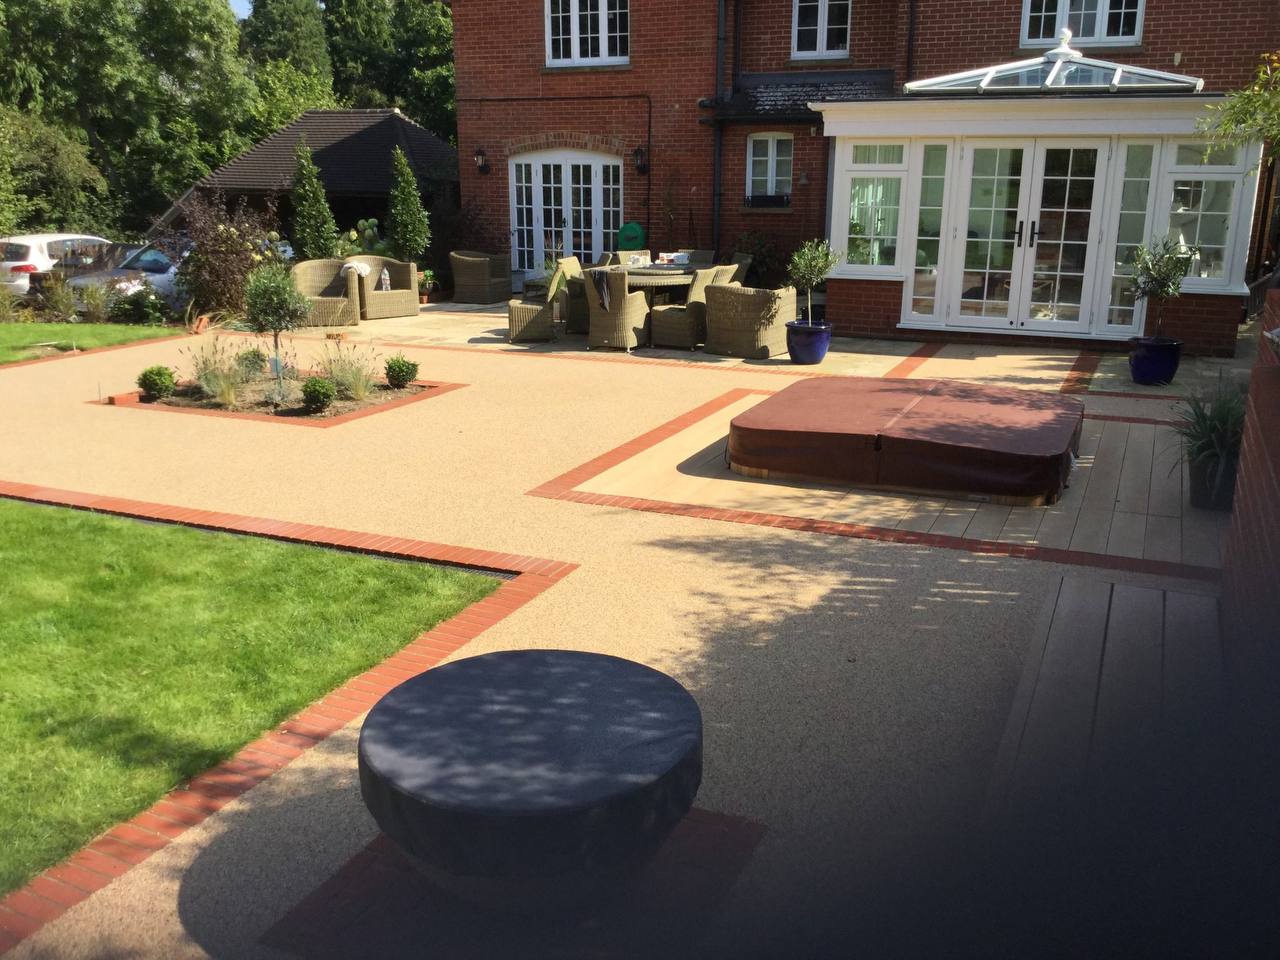 This is a photo of a resin patio installed in Ipswich by Ipswich Resin Driveways